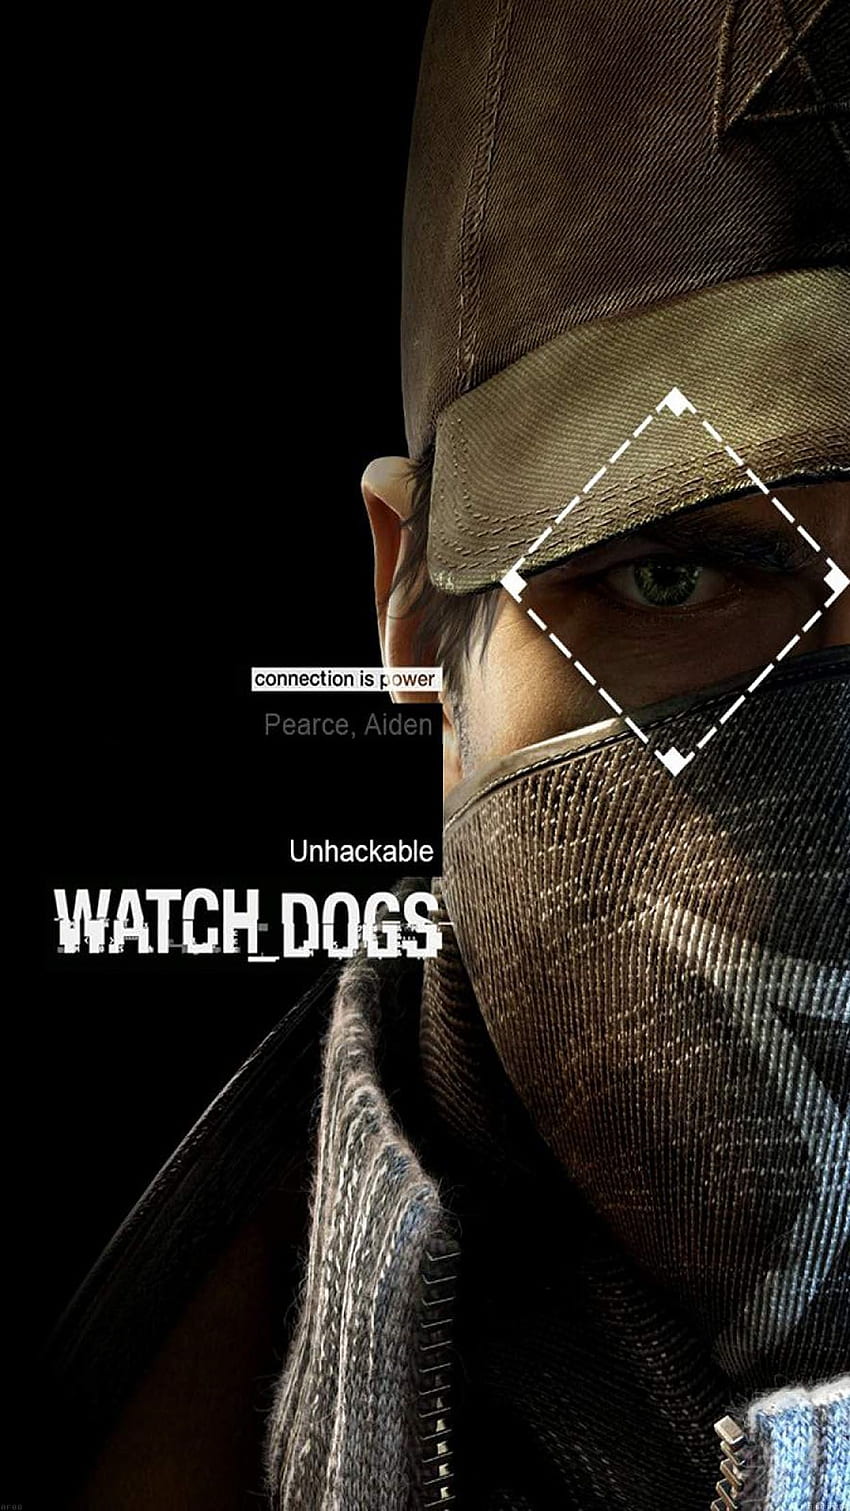 iPhone7papers - watcogs pearce aiden connection is power, Watch Dogs HD phone wallpaper